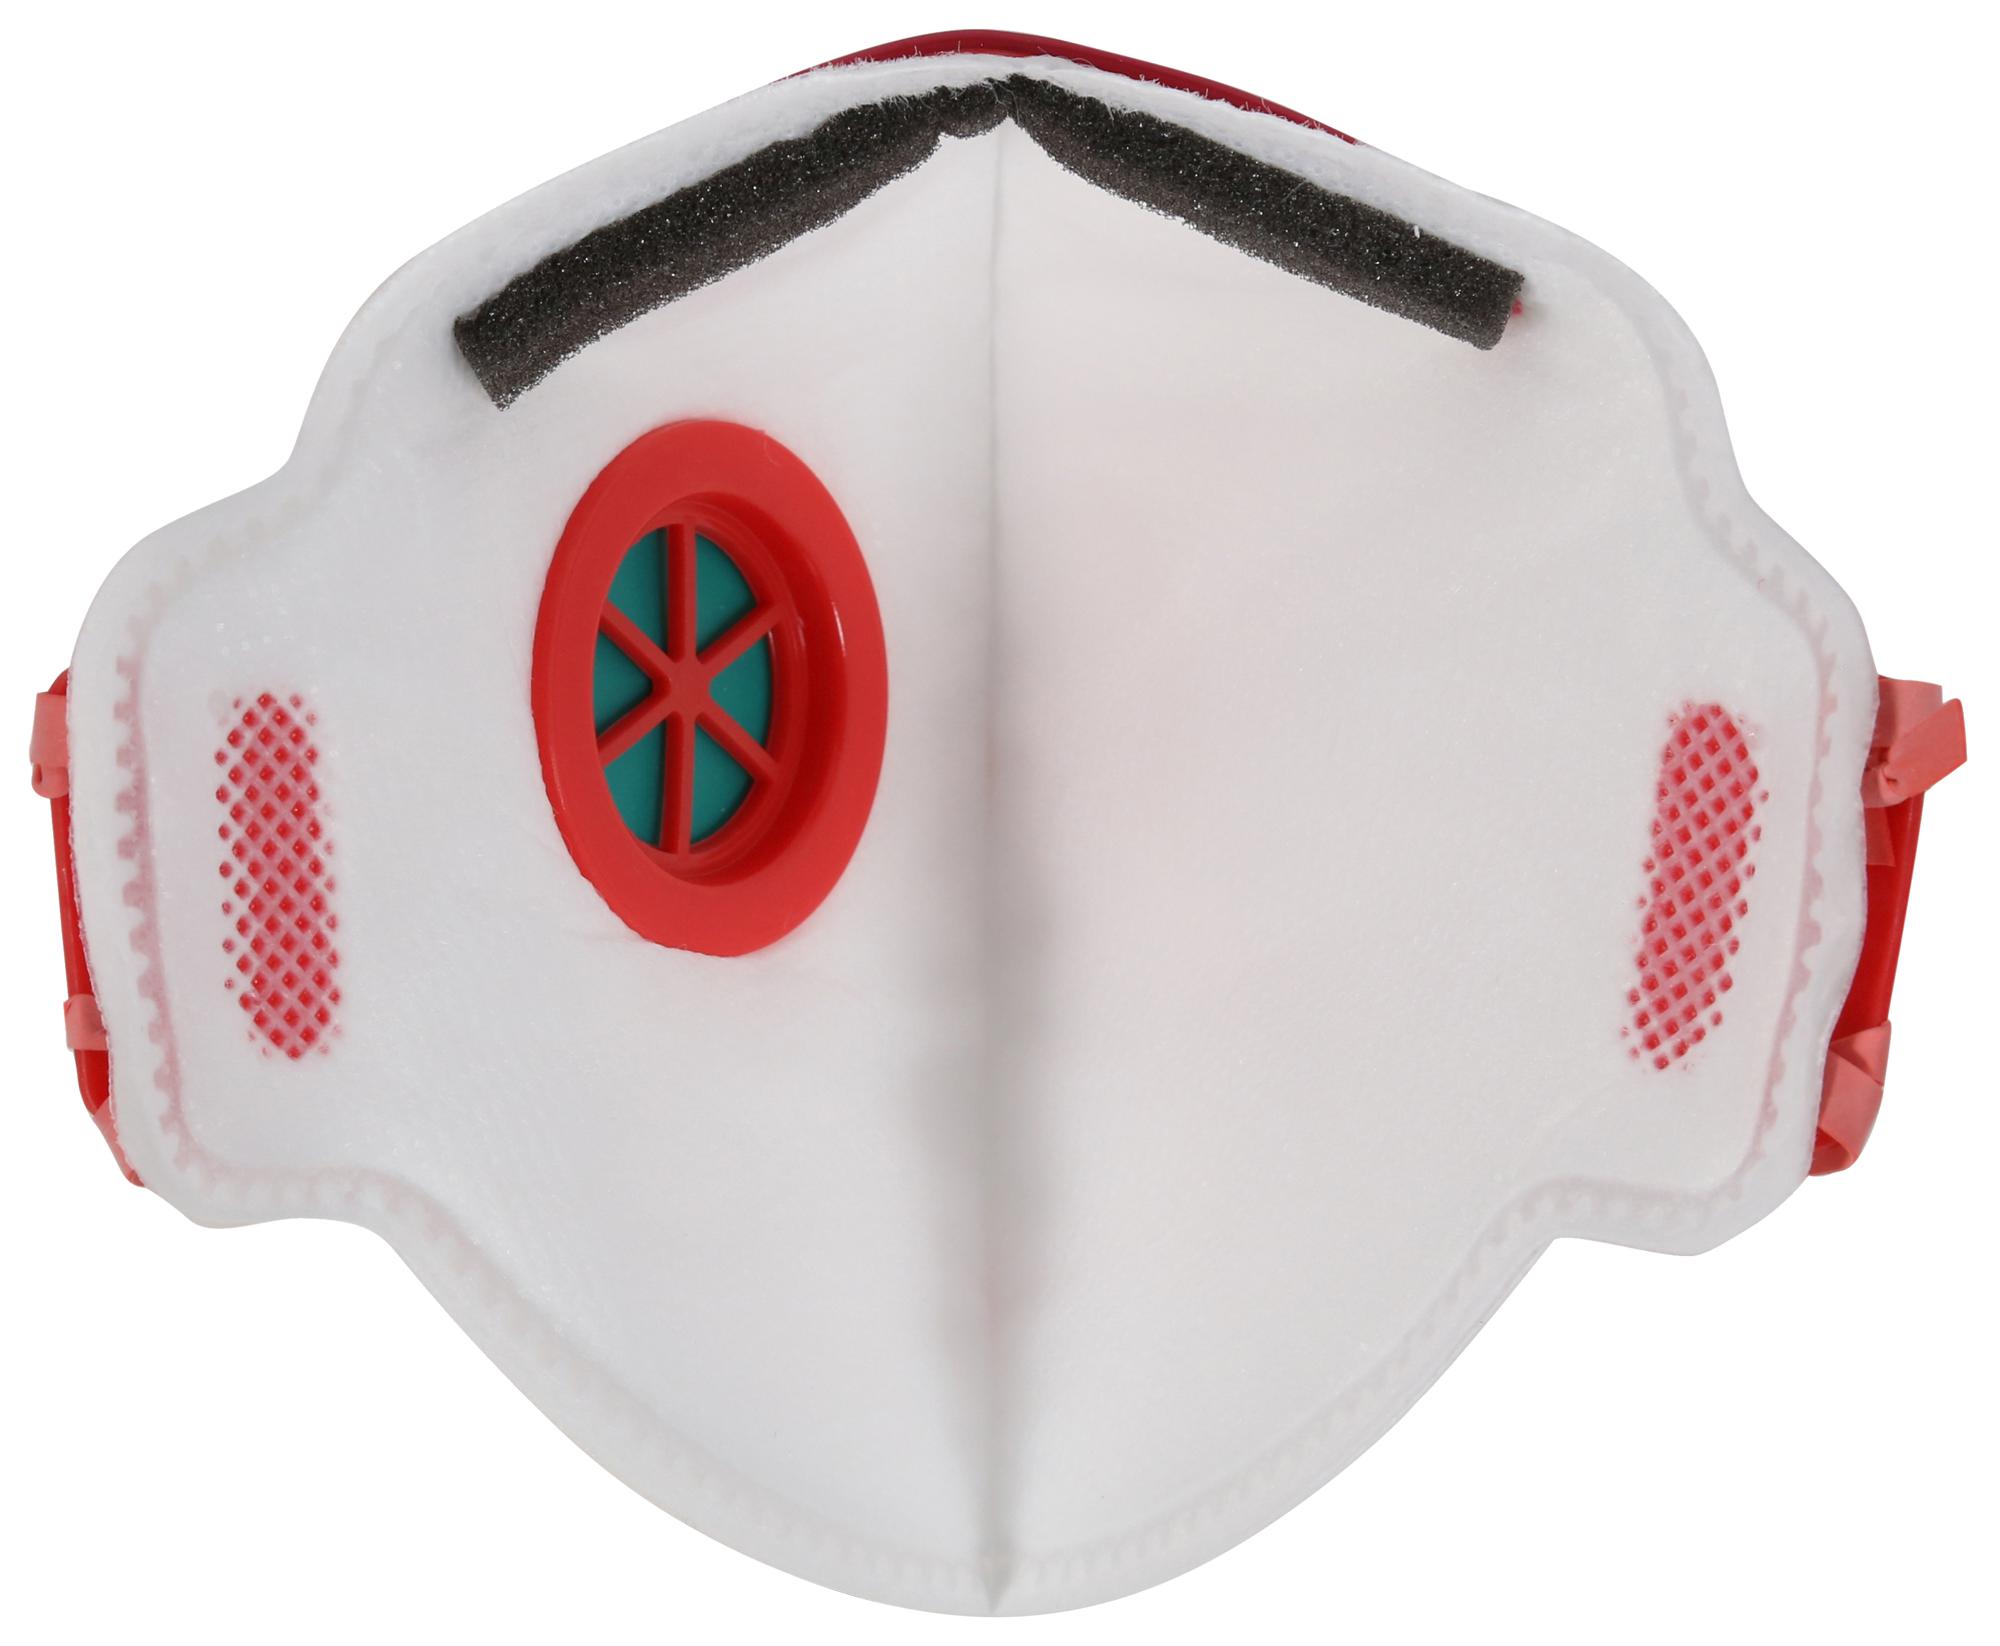 Uci Re/uc/uc-P3V Cupped Mask, Deluxe, Valved, Disposable